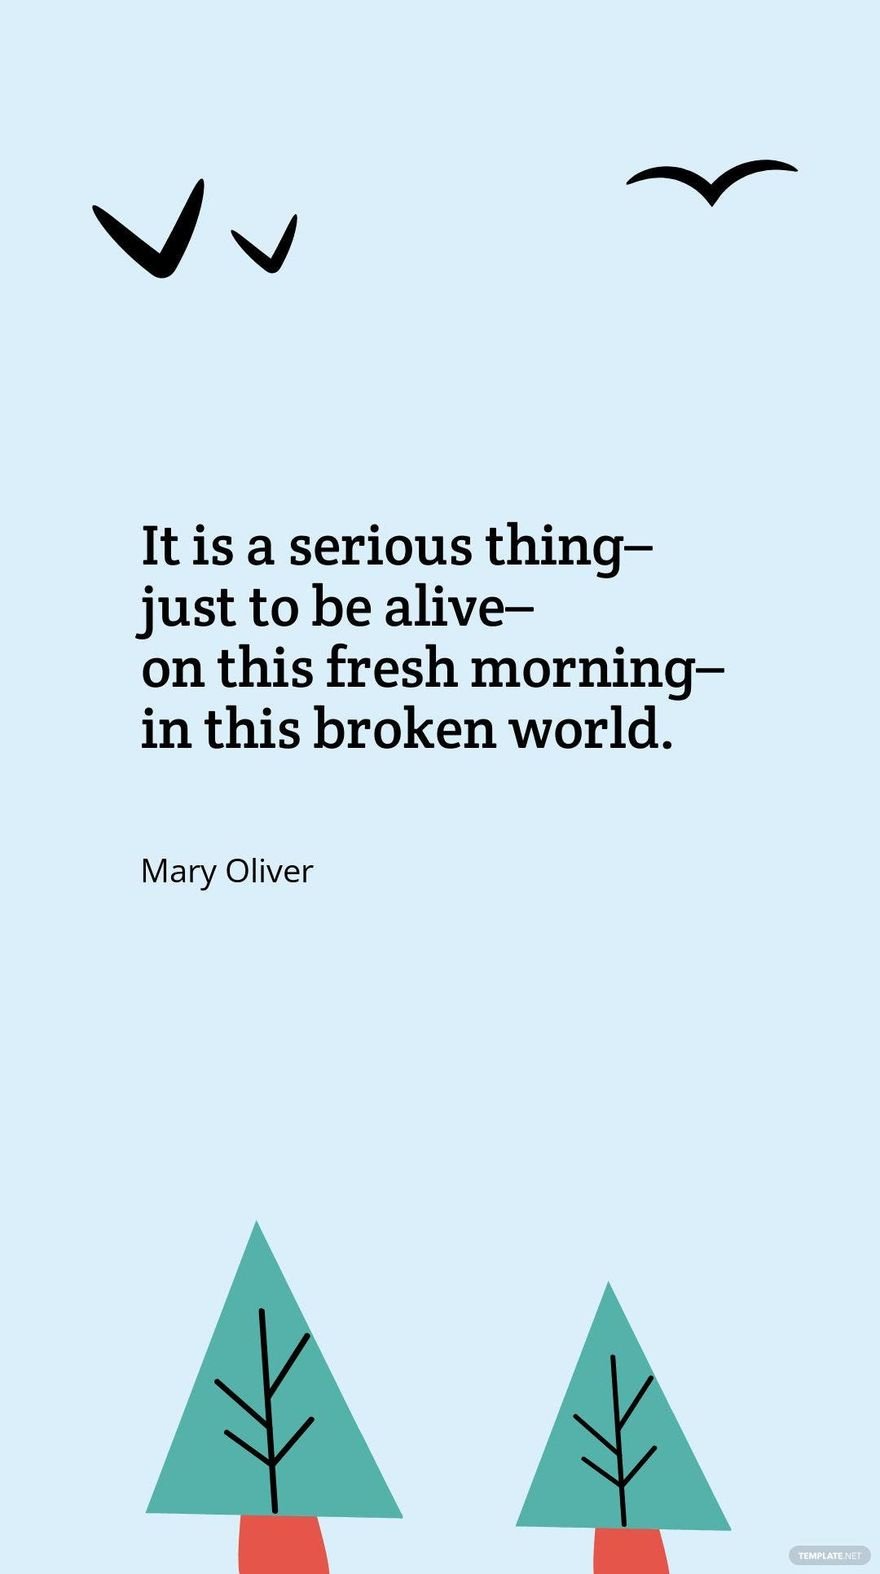 Mary Oliver - It is a serious thing – just to be alive – on this fresh morning – in this broken world.